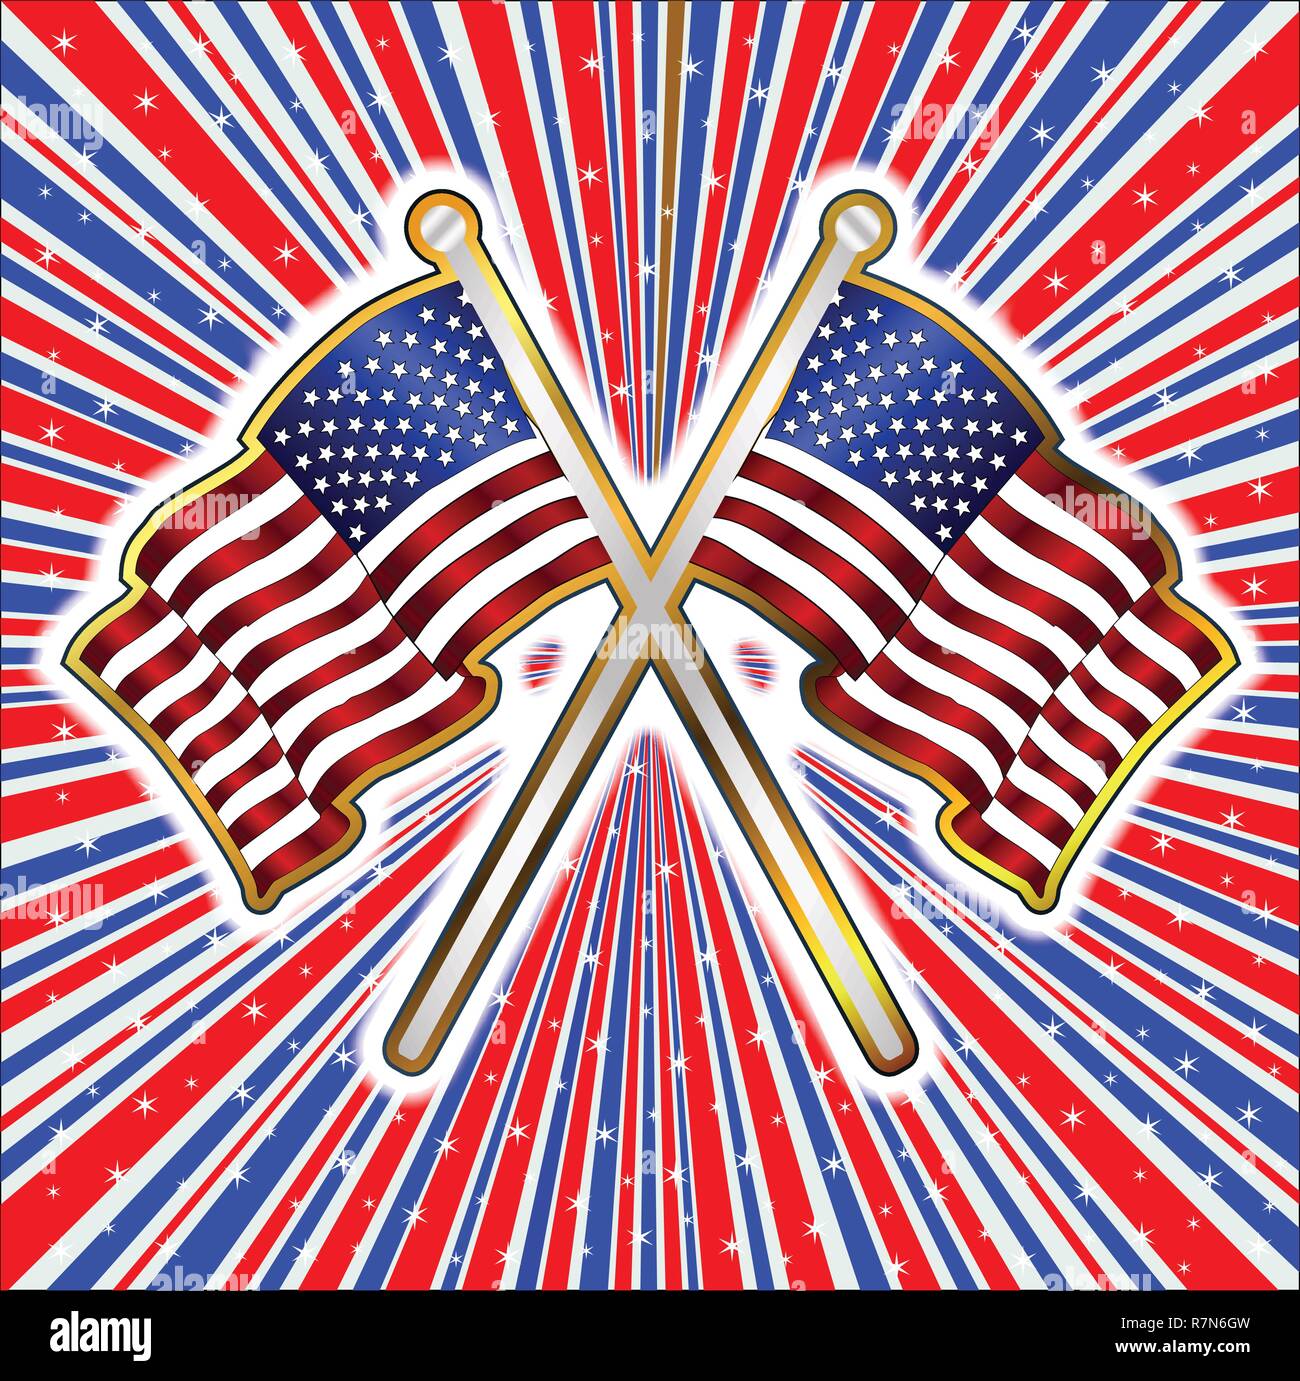 Abstract and retro grunge red white and blue backround design element with stars and Old Glory Pin Stock Vector